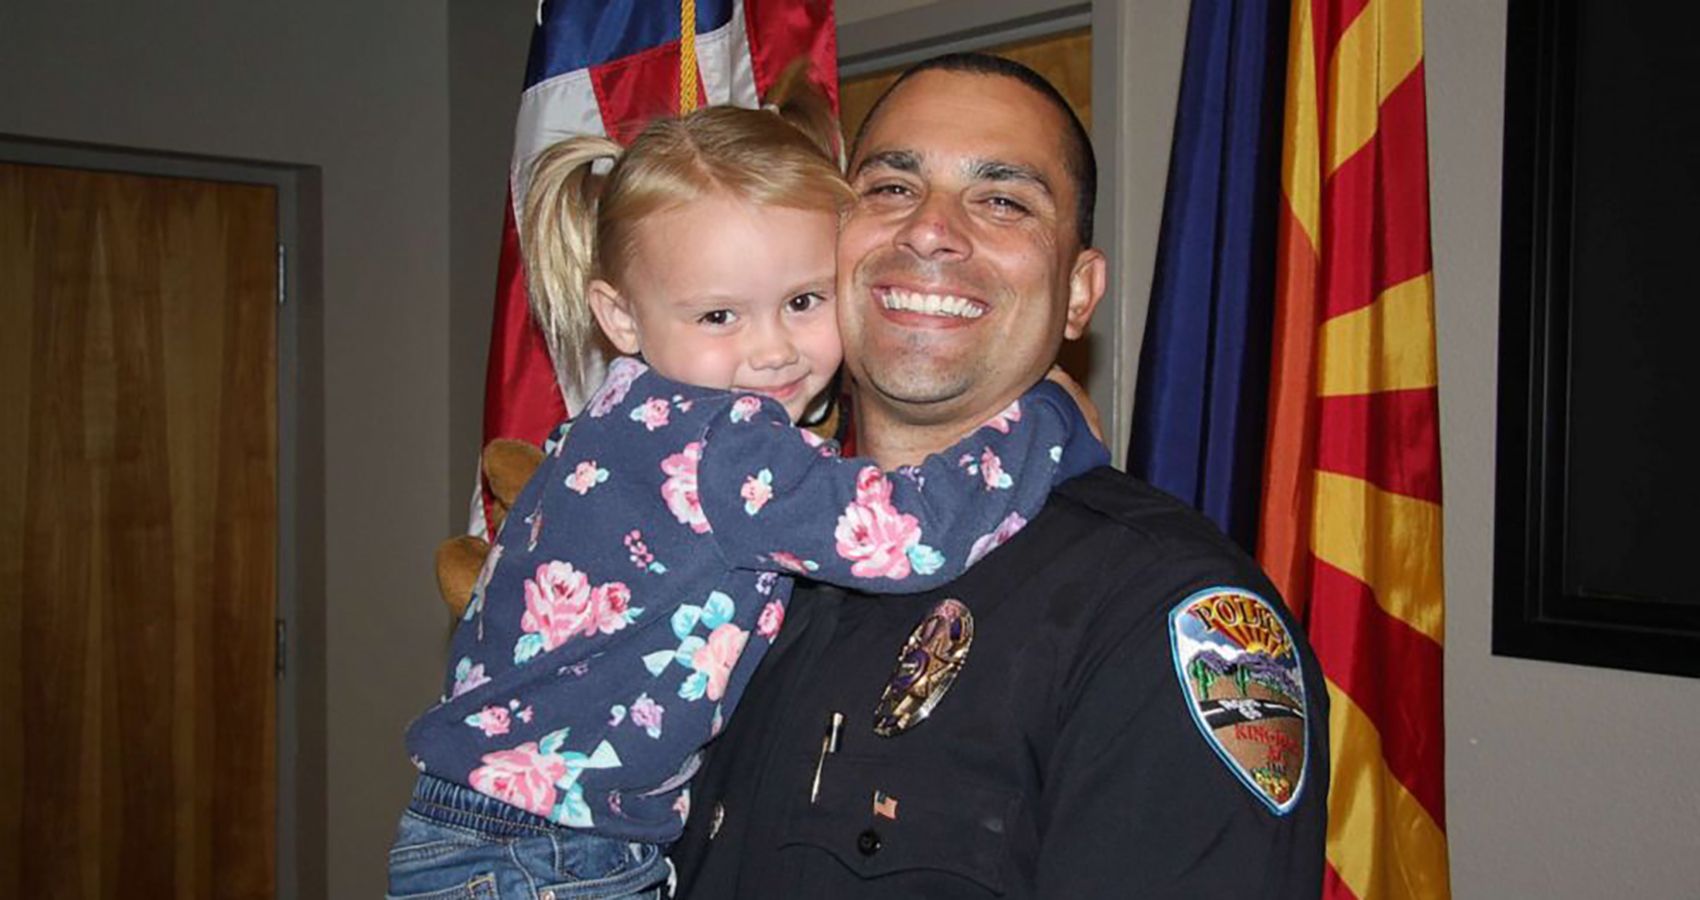 Little Girl Adopted By Police Officer Who Comforted Her On Worst Night